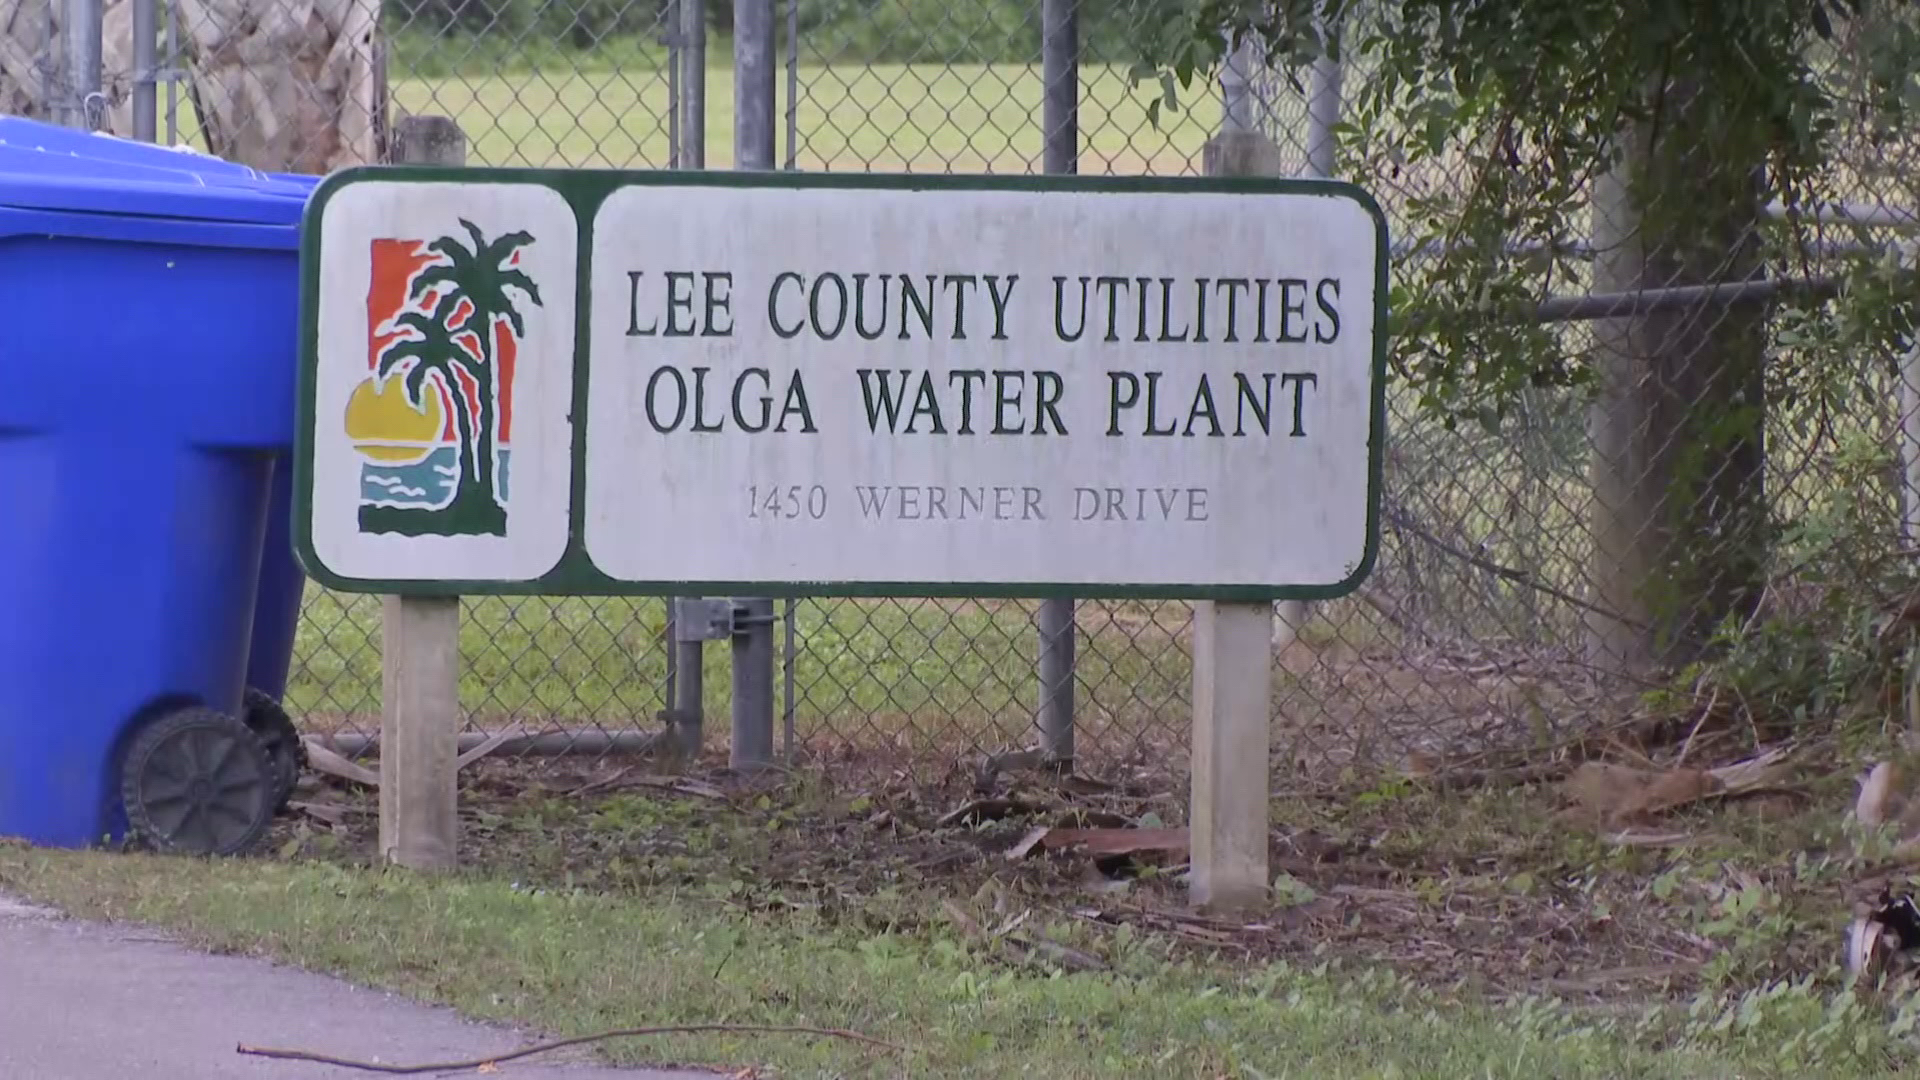 Lee County asks residents to conserve water during dry season